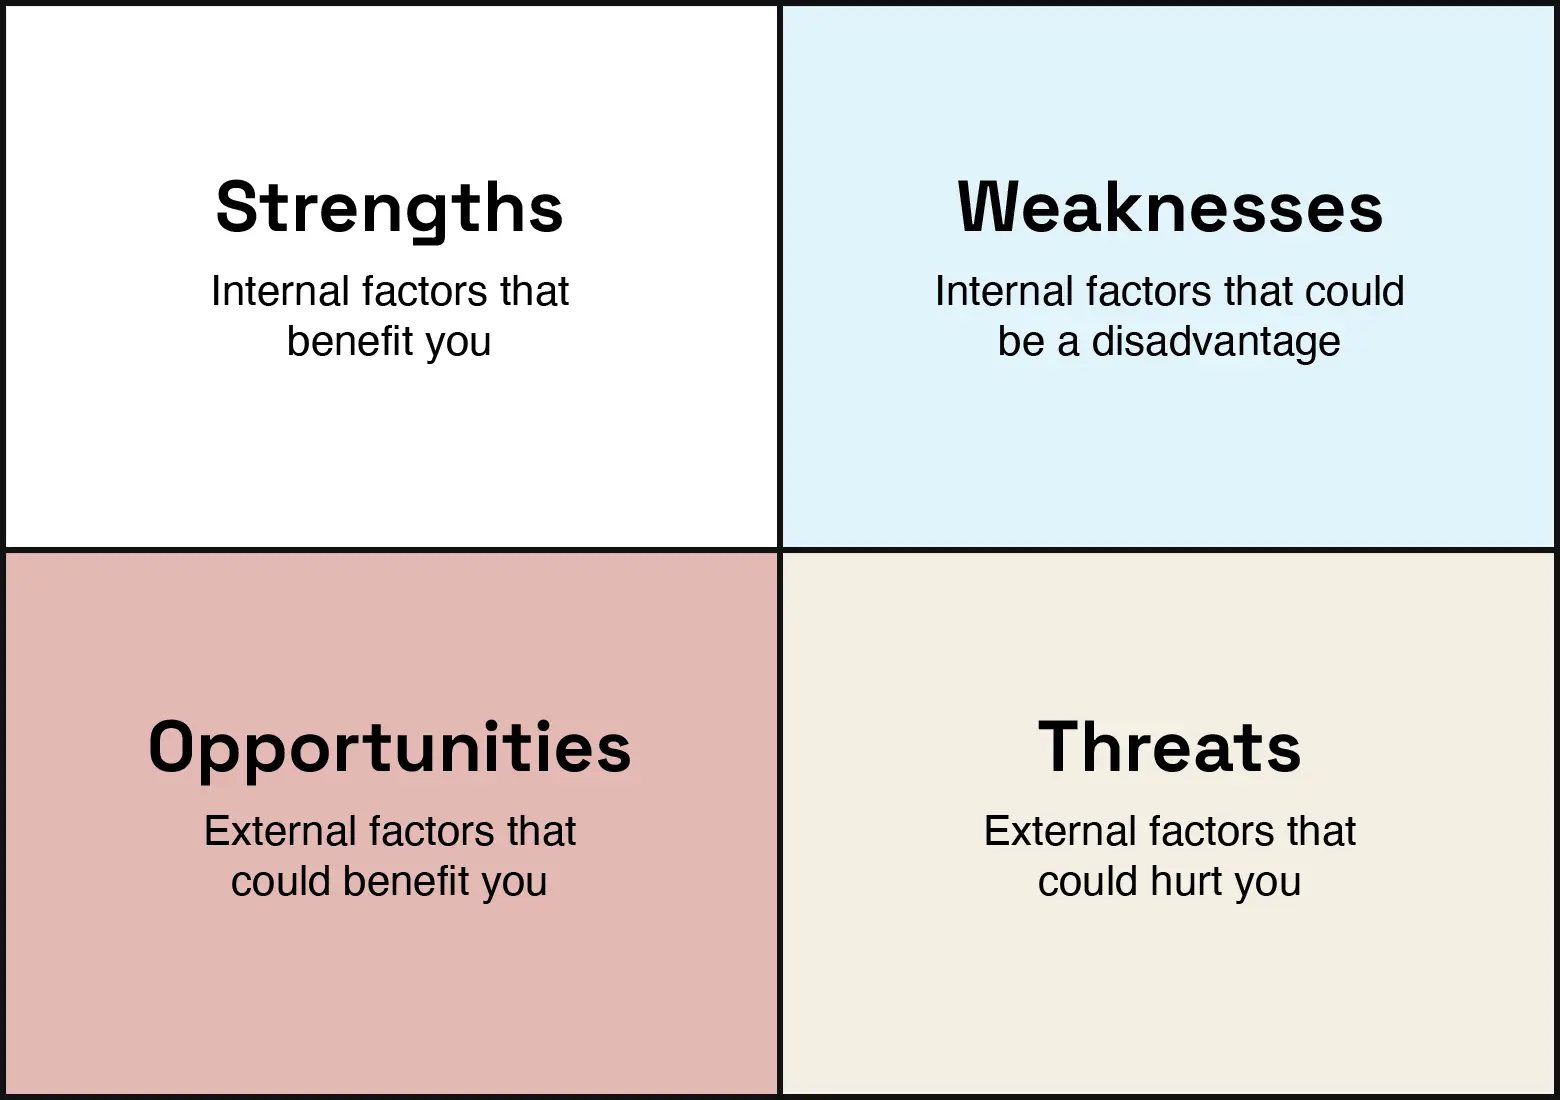 Image defines strengths, weaknesses, opportunities, and threats (SWOT) for business.